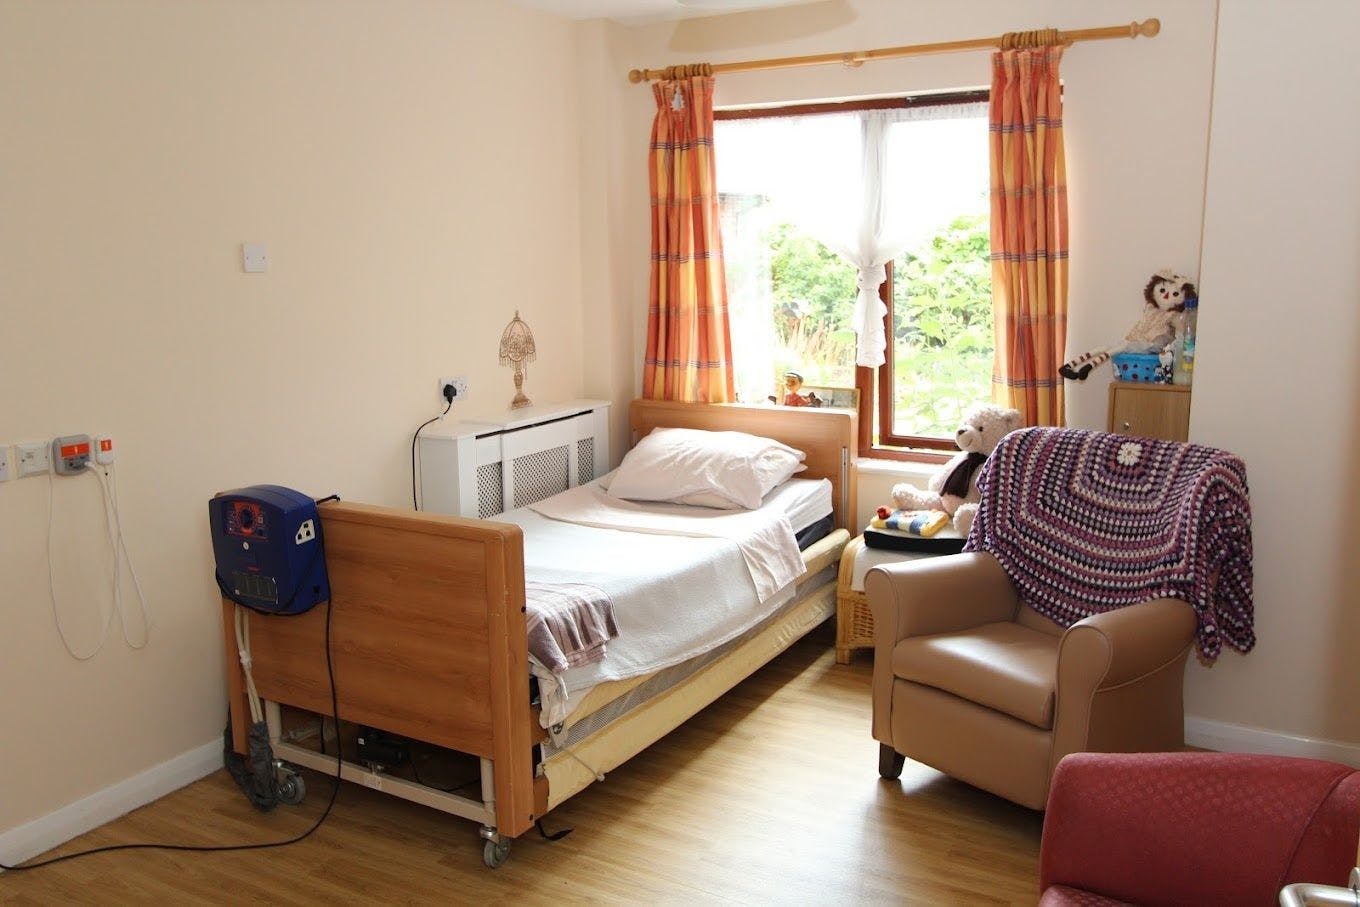 Shaw Healthcare - The Hawthorns care home 008